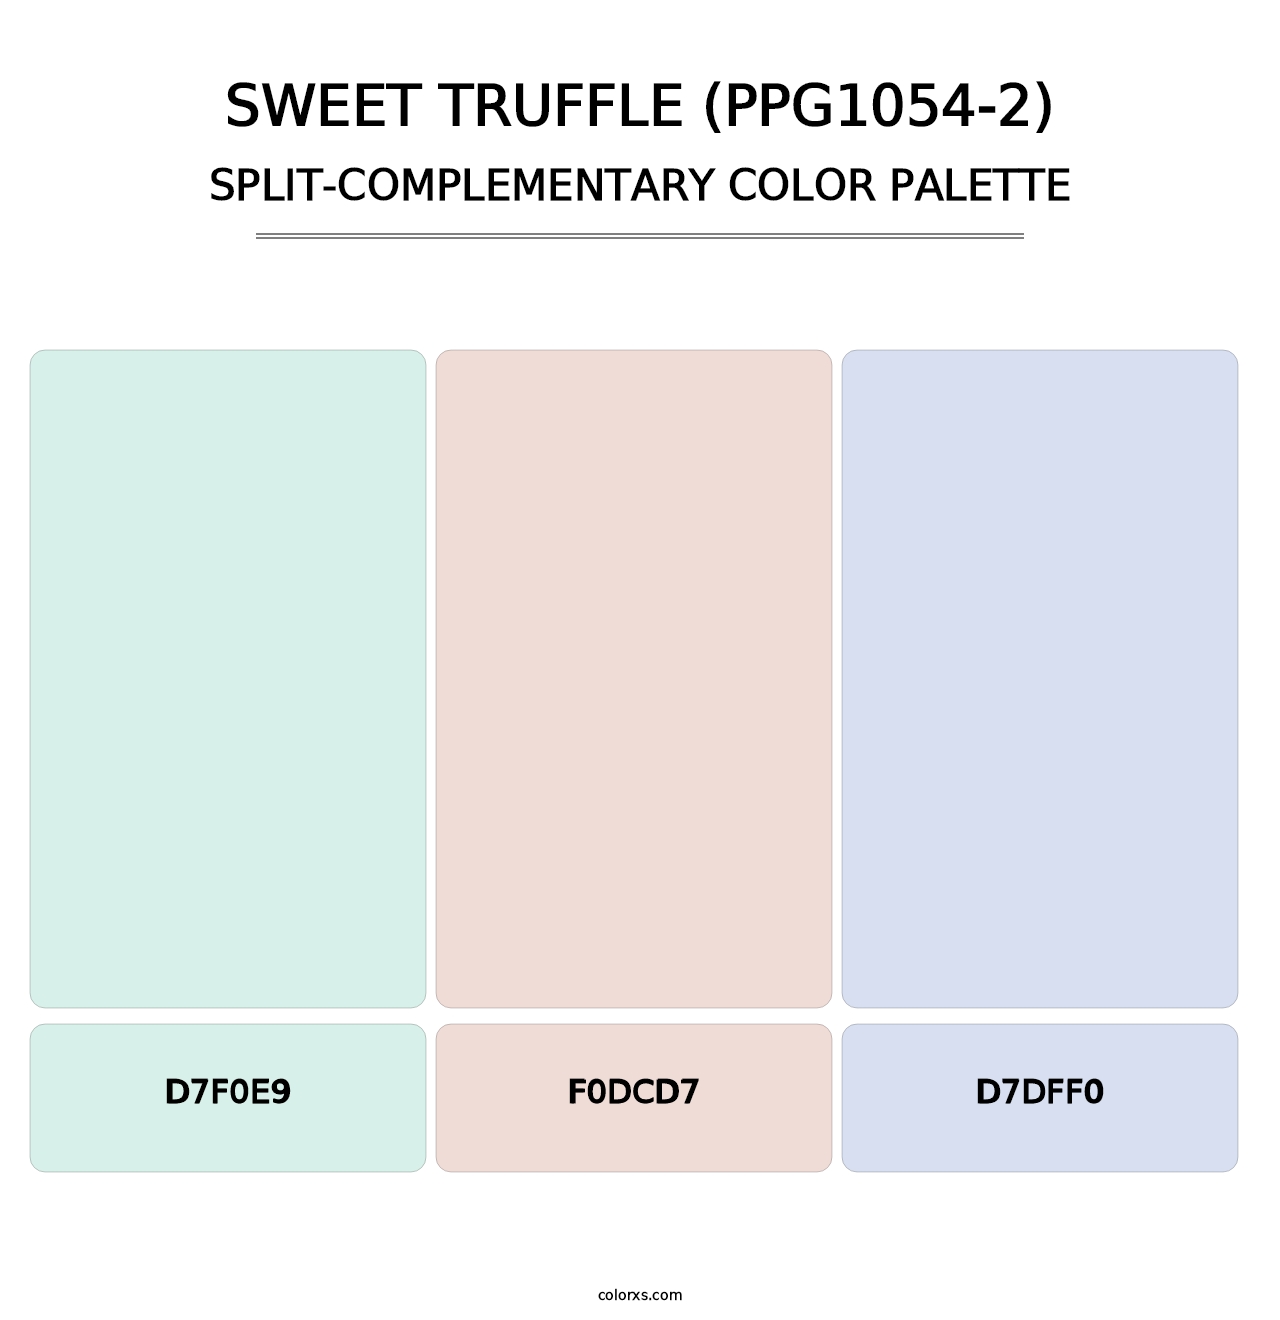 Sweet Truffle (PPG1054-2) - Split-Complementary Color Palette